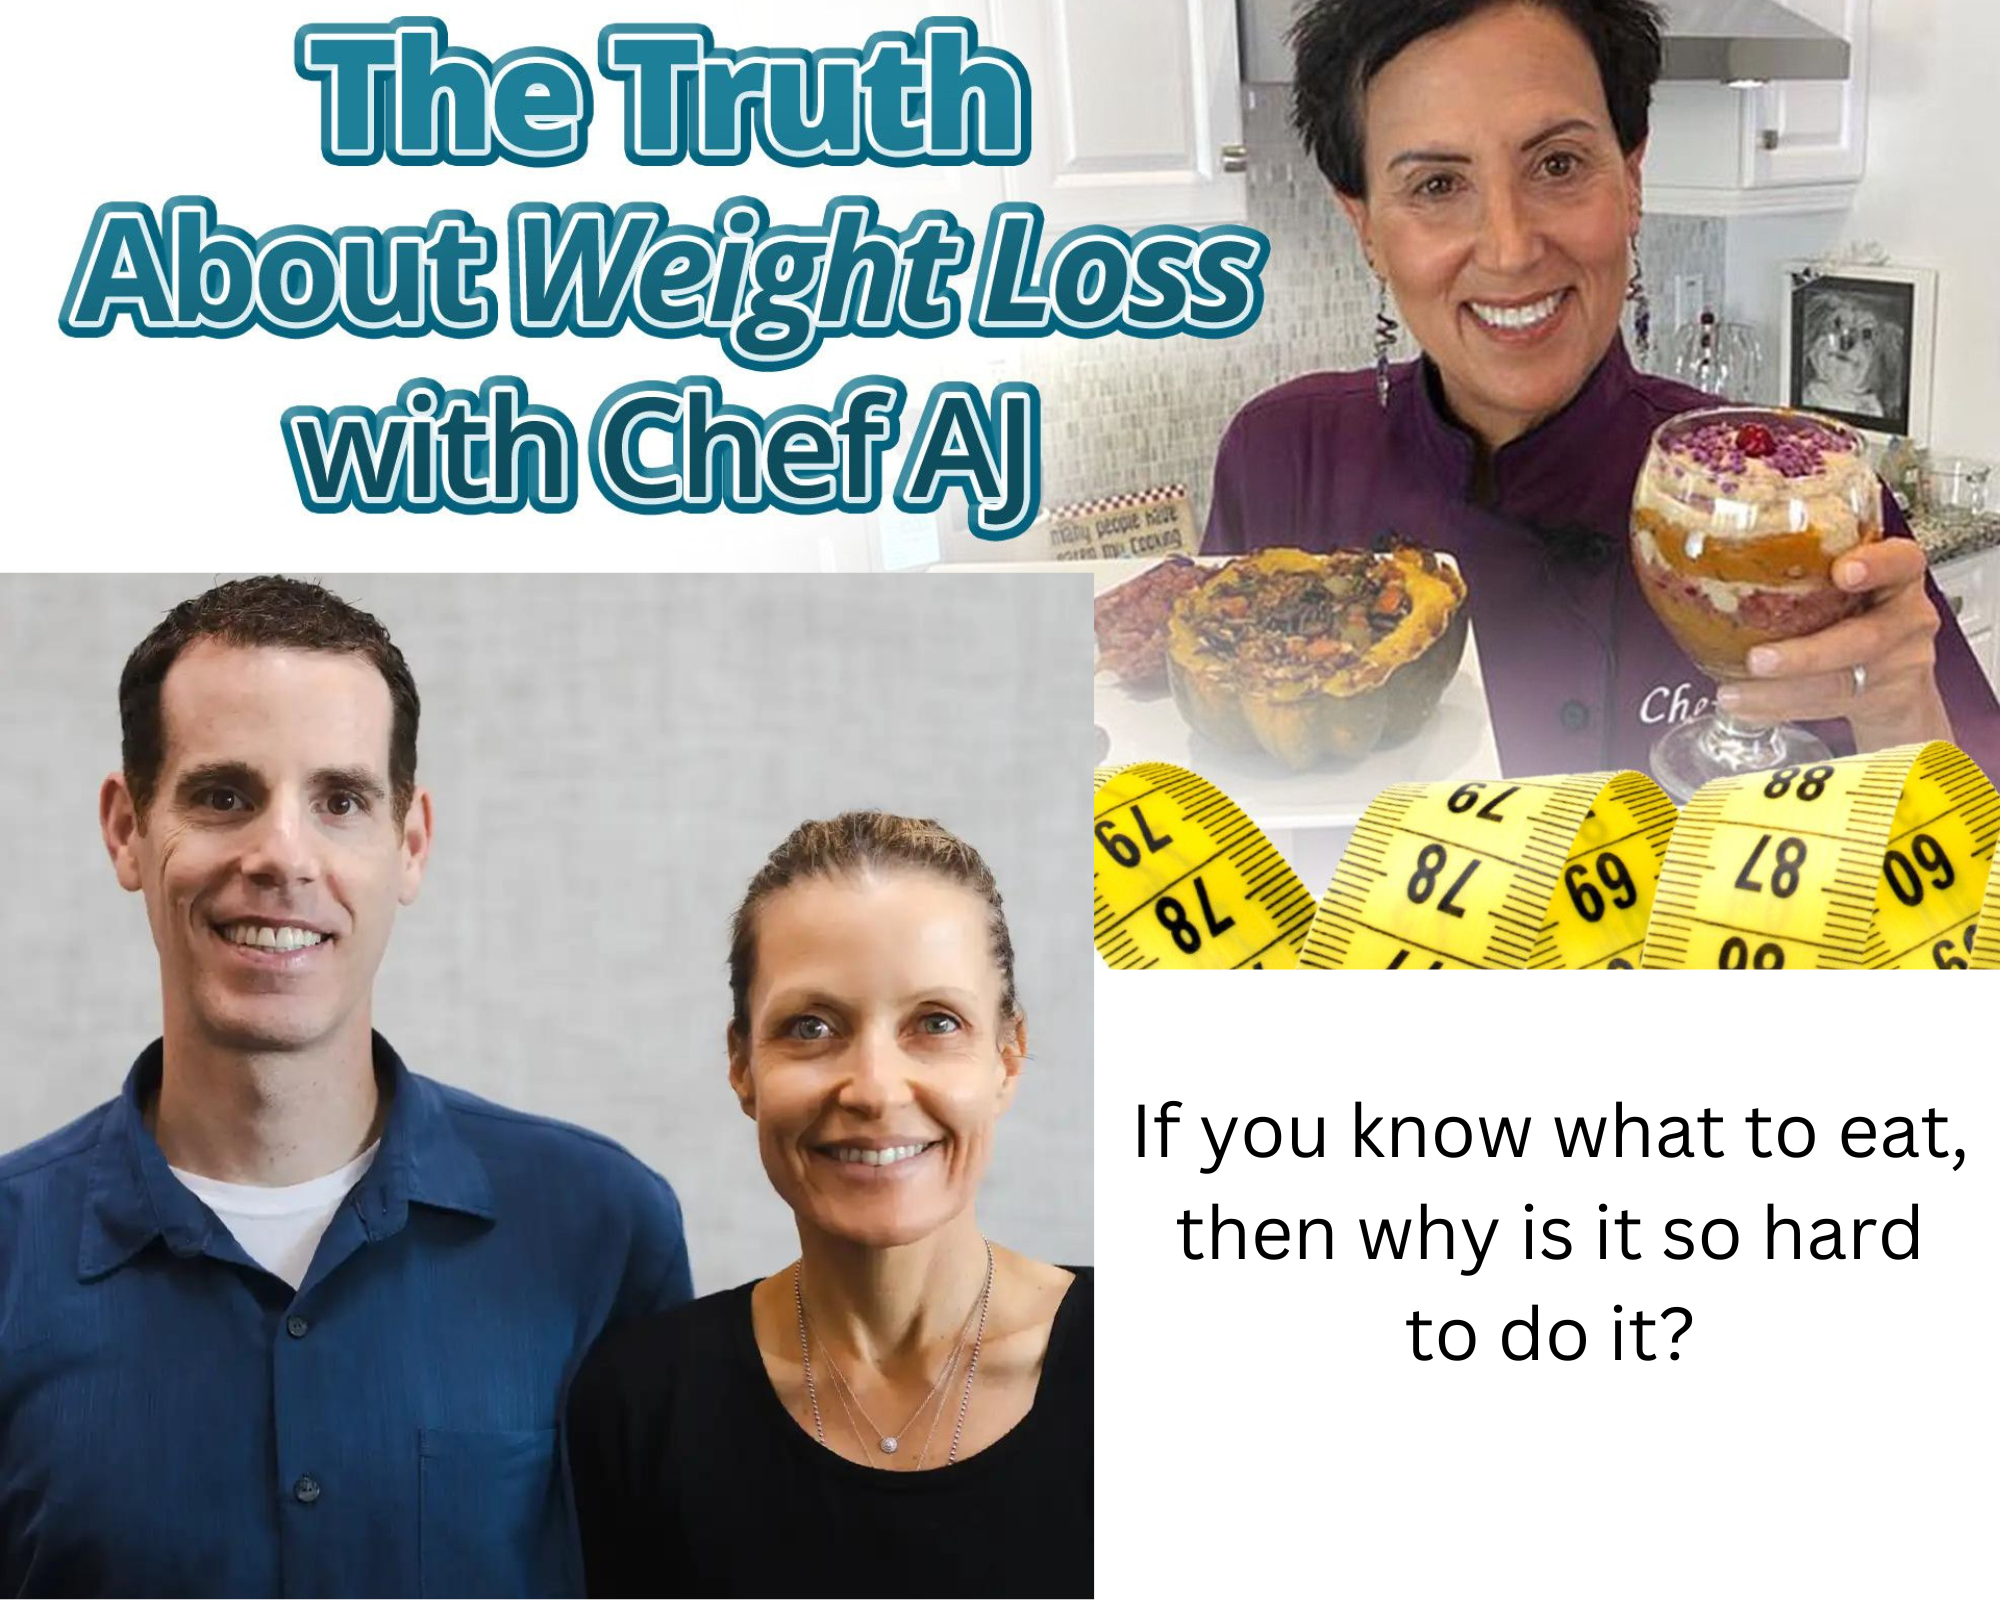 Featured image for “The Truth About Weight Loss”